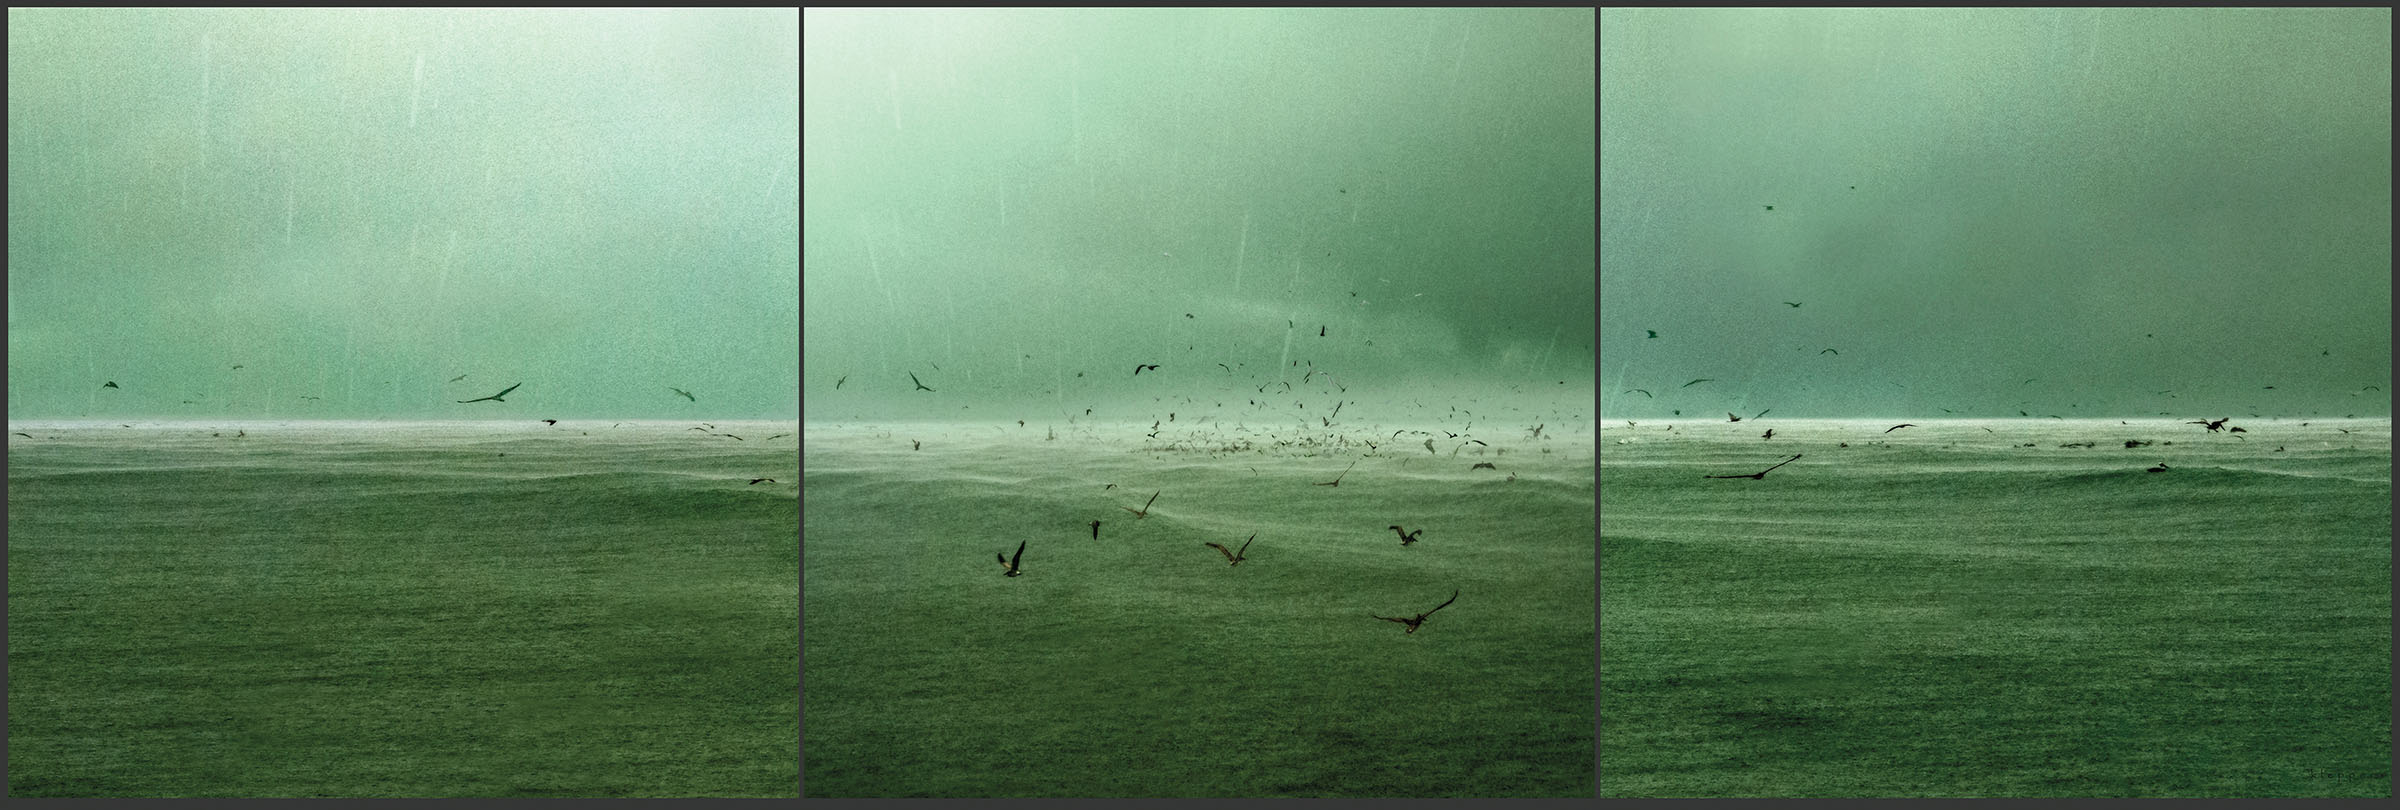 A collection of three images of birds flying by a large body of water with a greenish dark tint